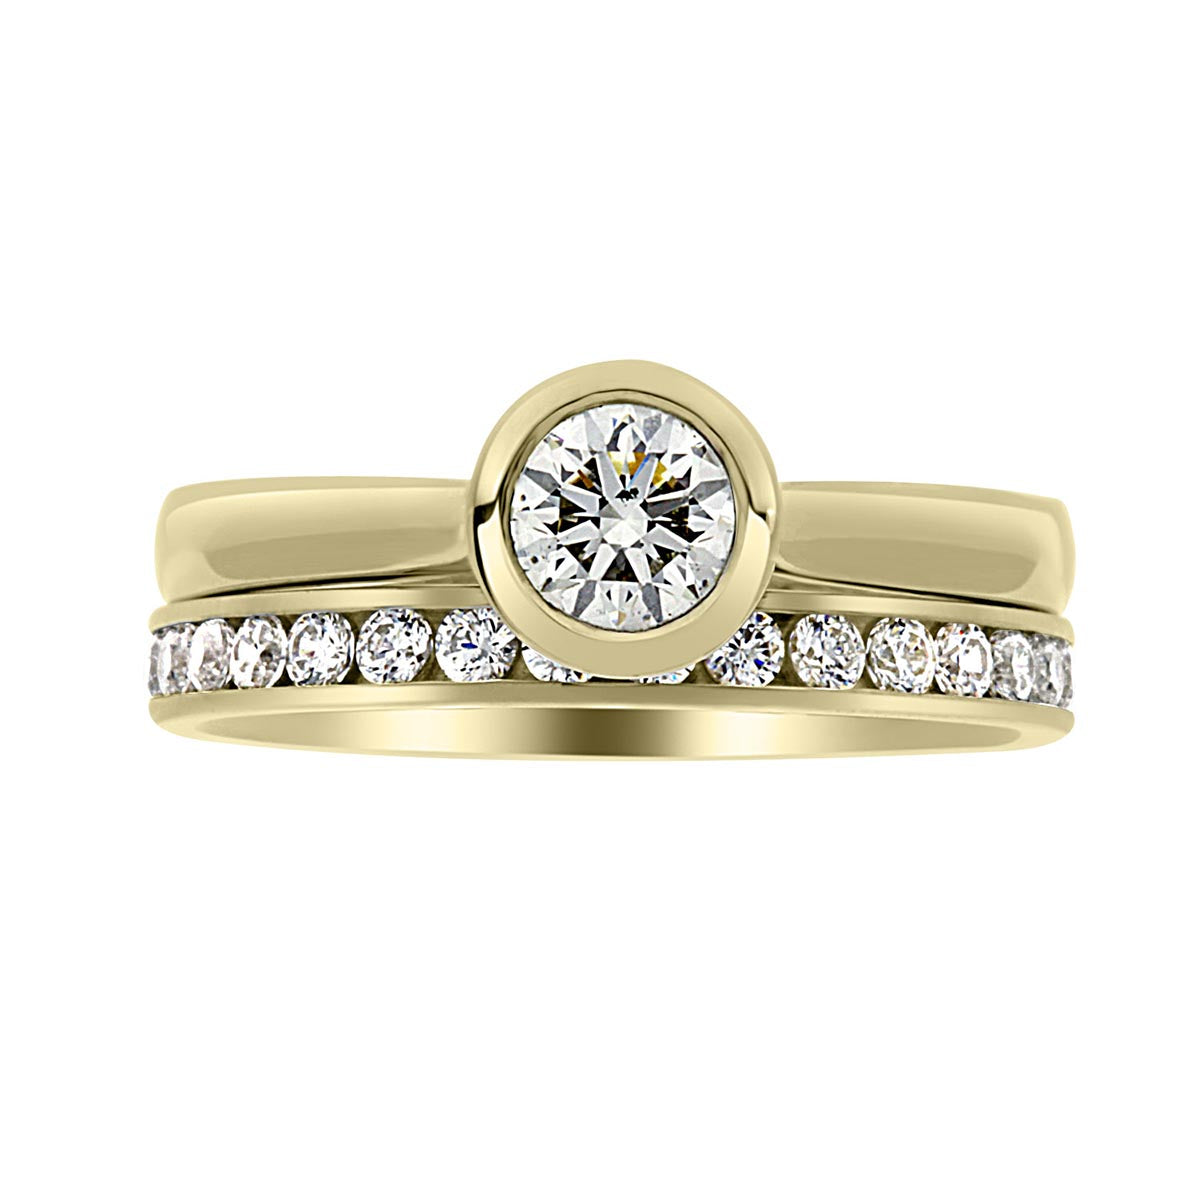 Bezel Set Engagement ring in 18kt yellow gold  with a matching diamond wedding ring